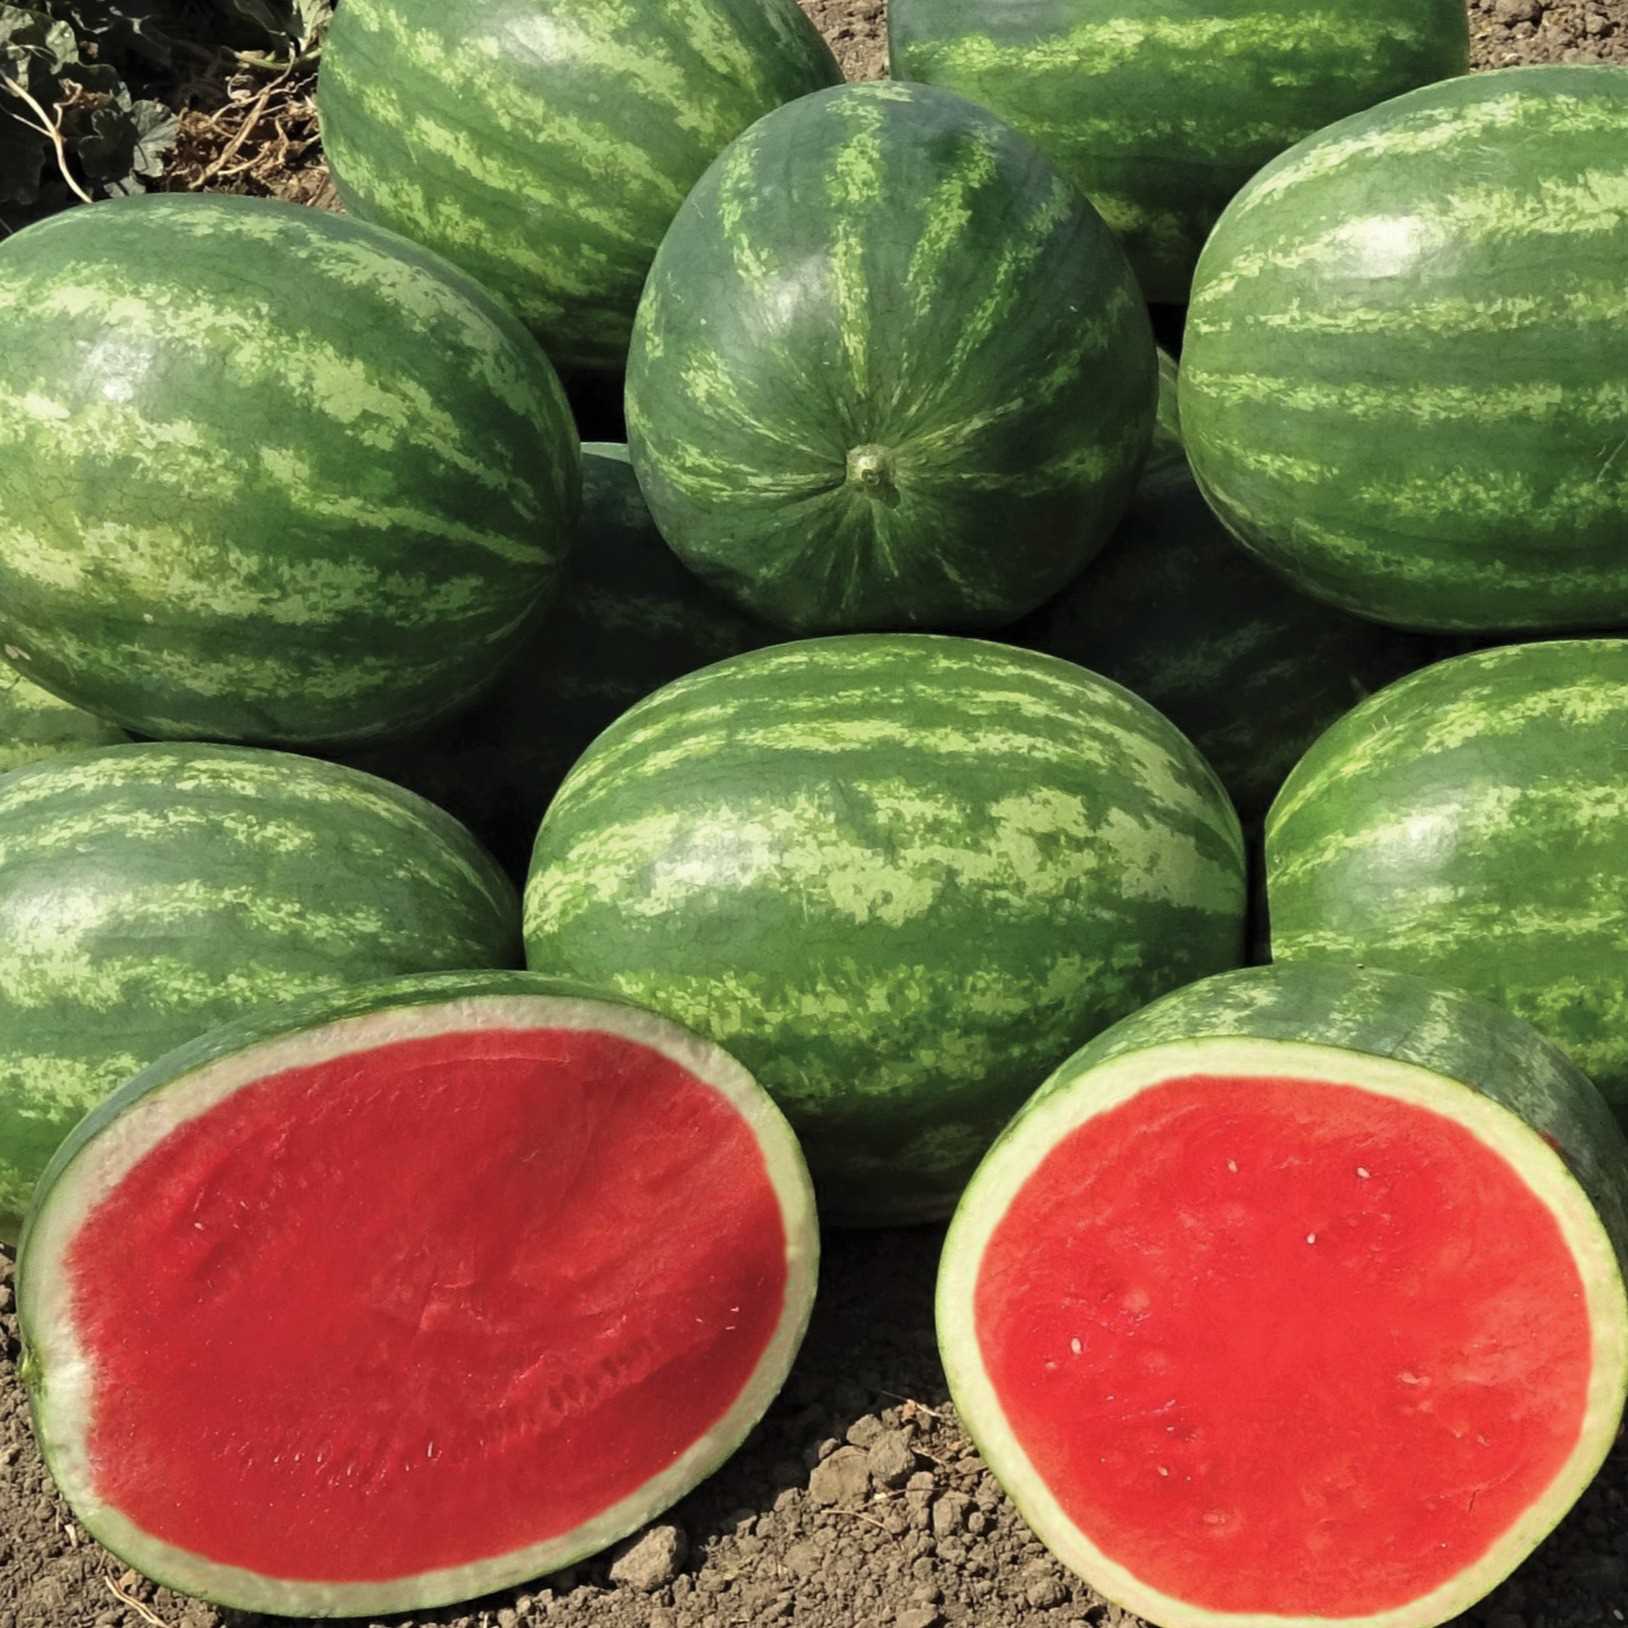 i'm looking for Watermelon suppliers